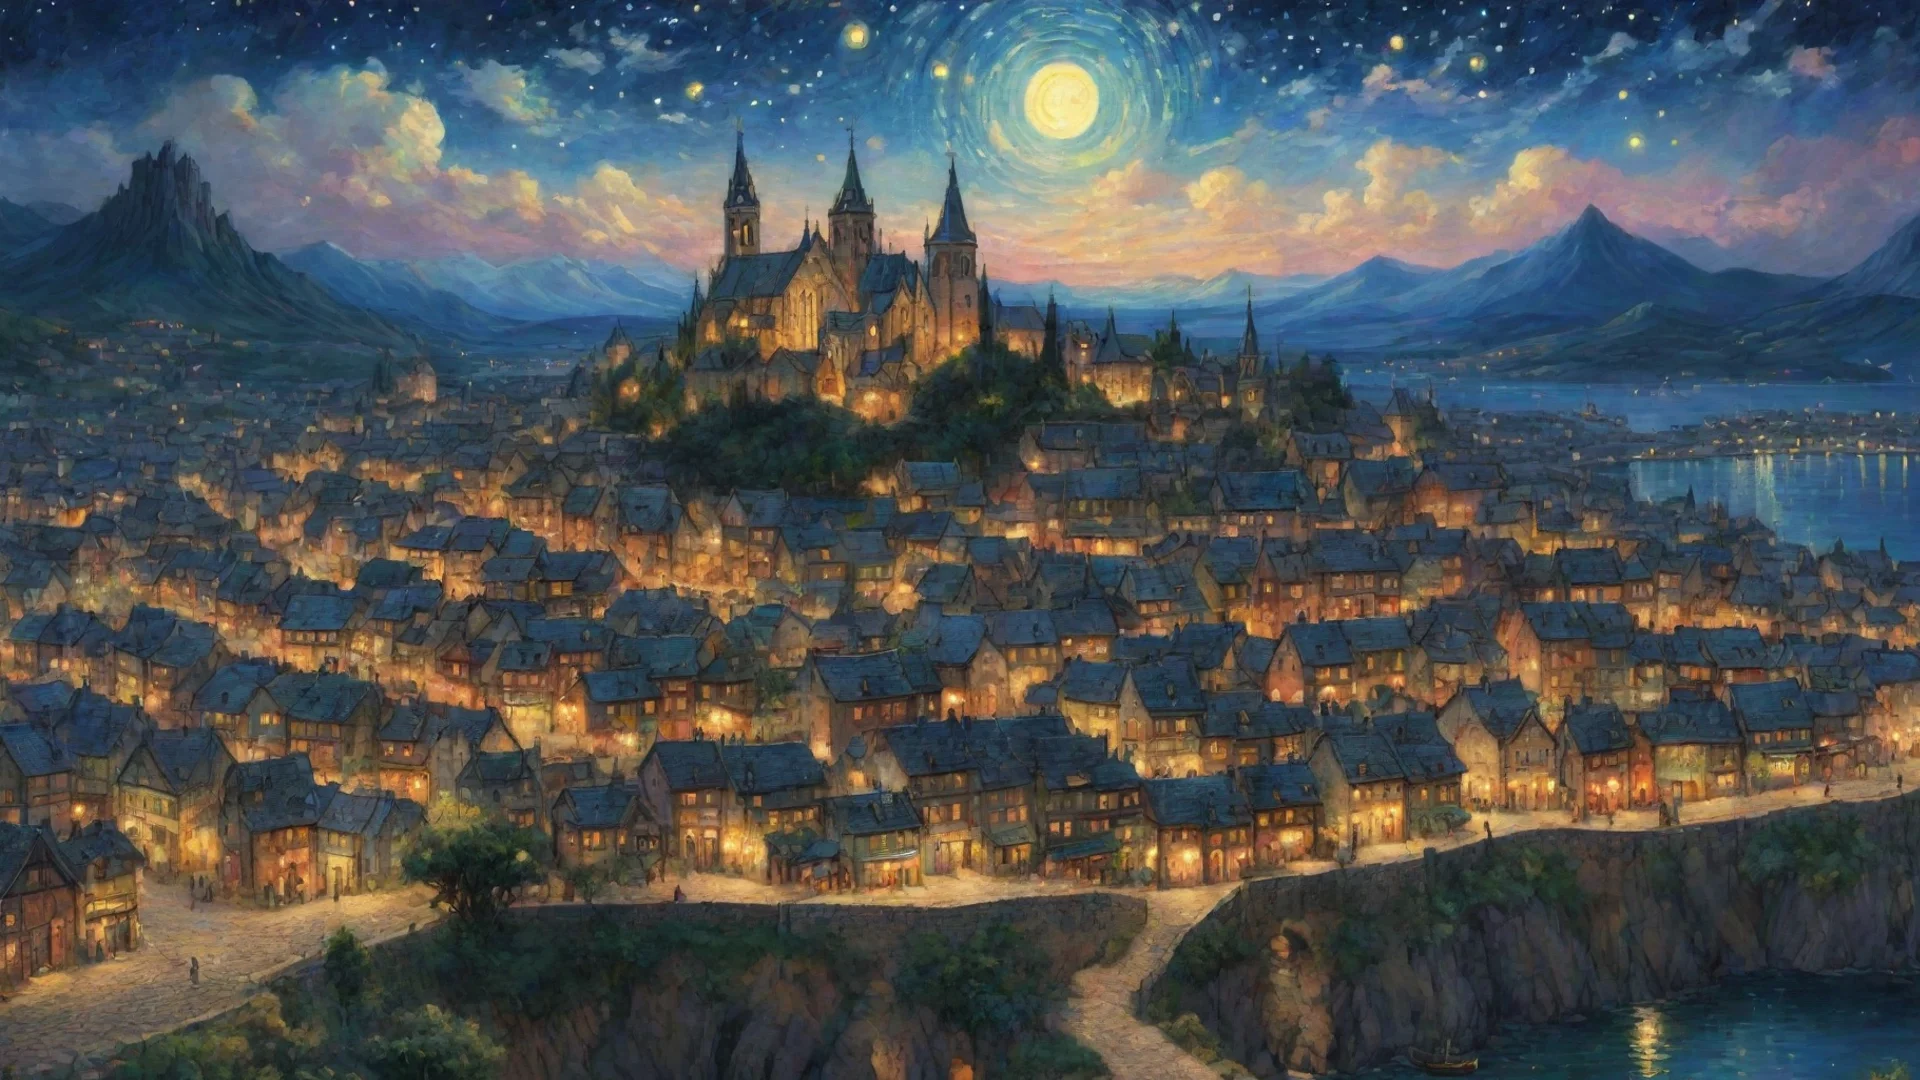 aiamazing heavenly epic town lit up at night sky epic lovely artistic ghibli van gogh happyness bliss peace  detailed asthetic hd wow awesome portrait 2 wide